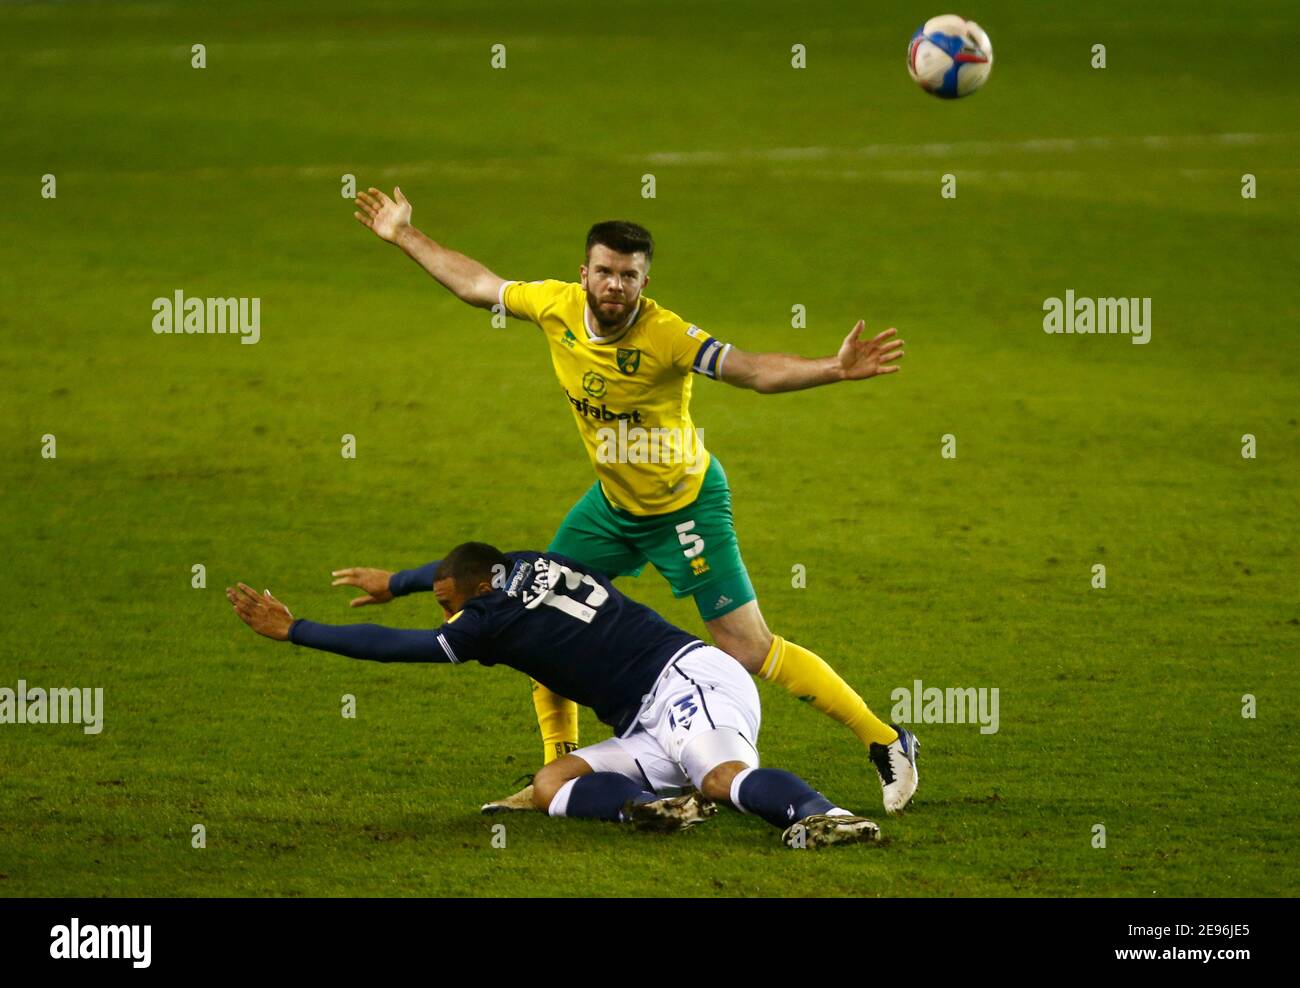 LONDON, United Kingdom, FEBRUARY 02: Kenneth Zohore of Millwall tussle with Norwich City's Grant Hanley during The Sky Bet Championship between Millwall and Norwich City at The Den Stadium, London on 2nd February, 2021 Credit: Action Foto Sport/Alamy Live News Stock Photo